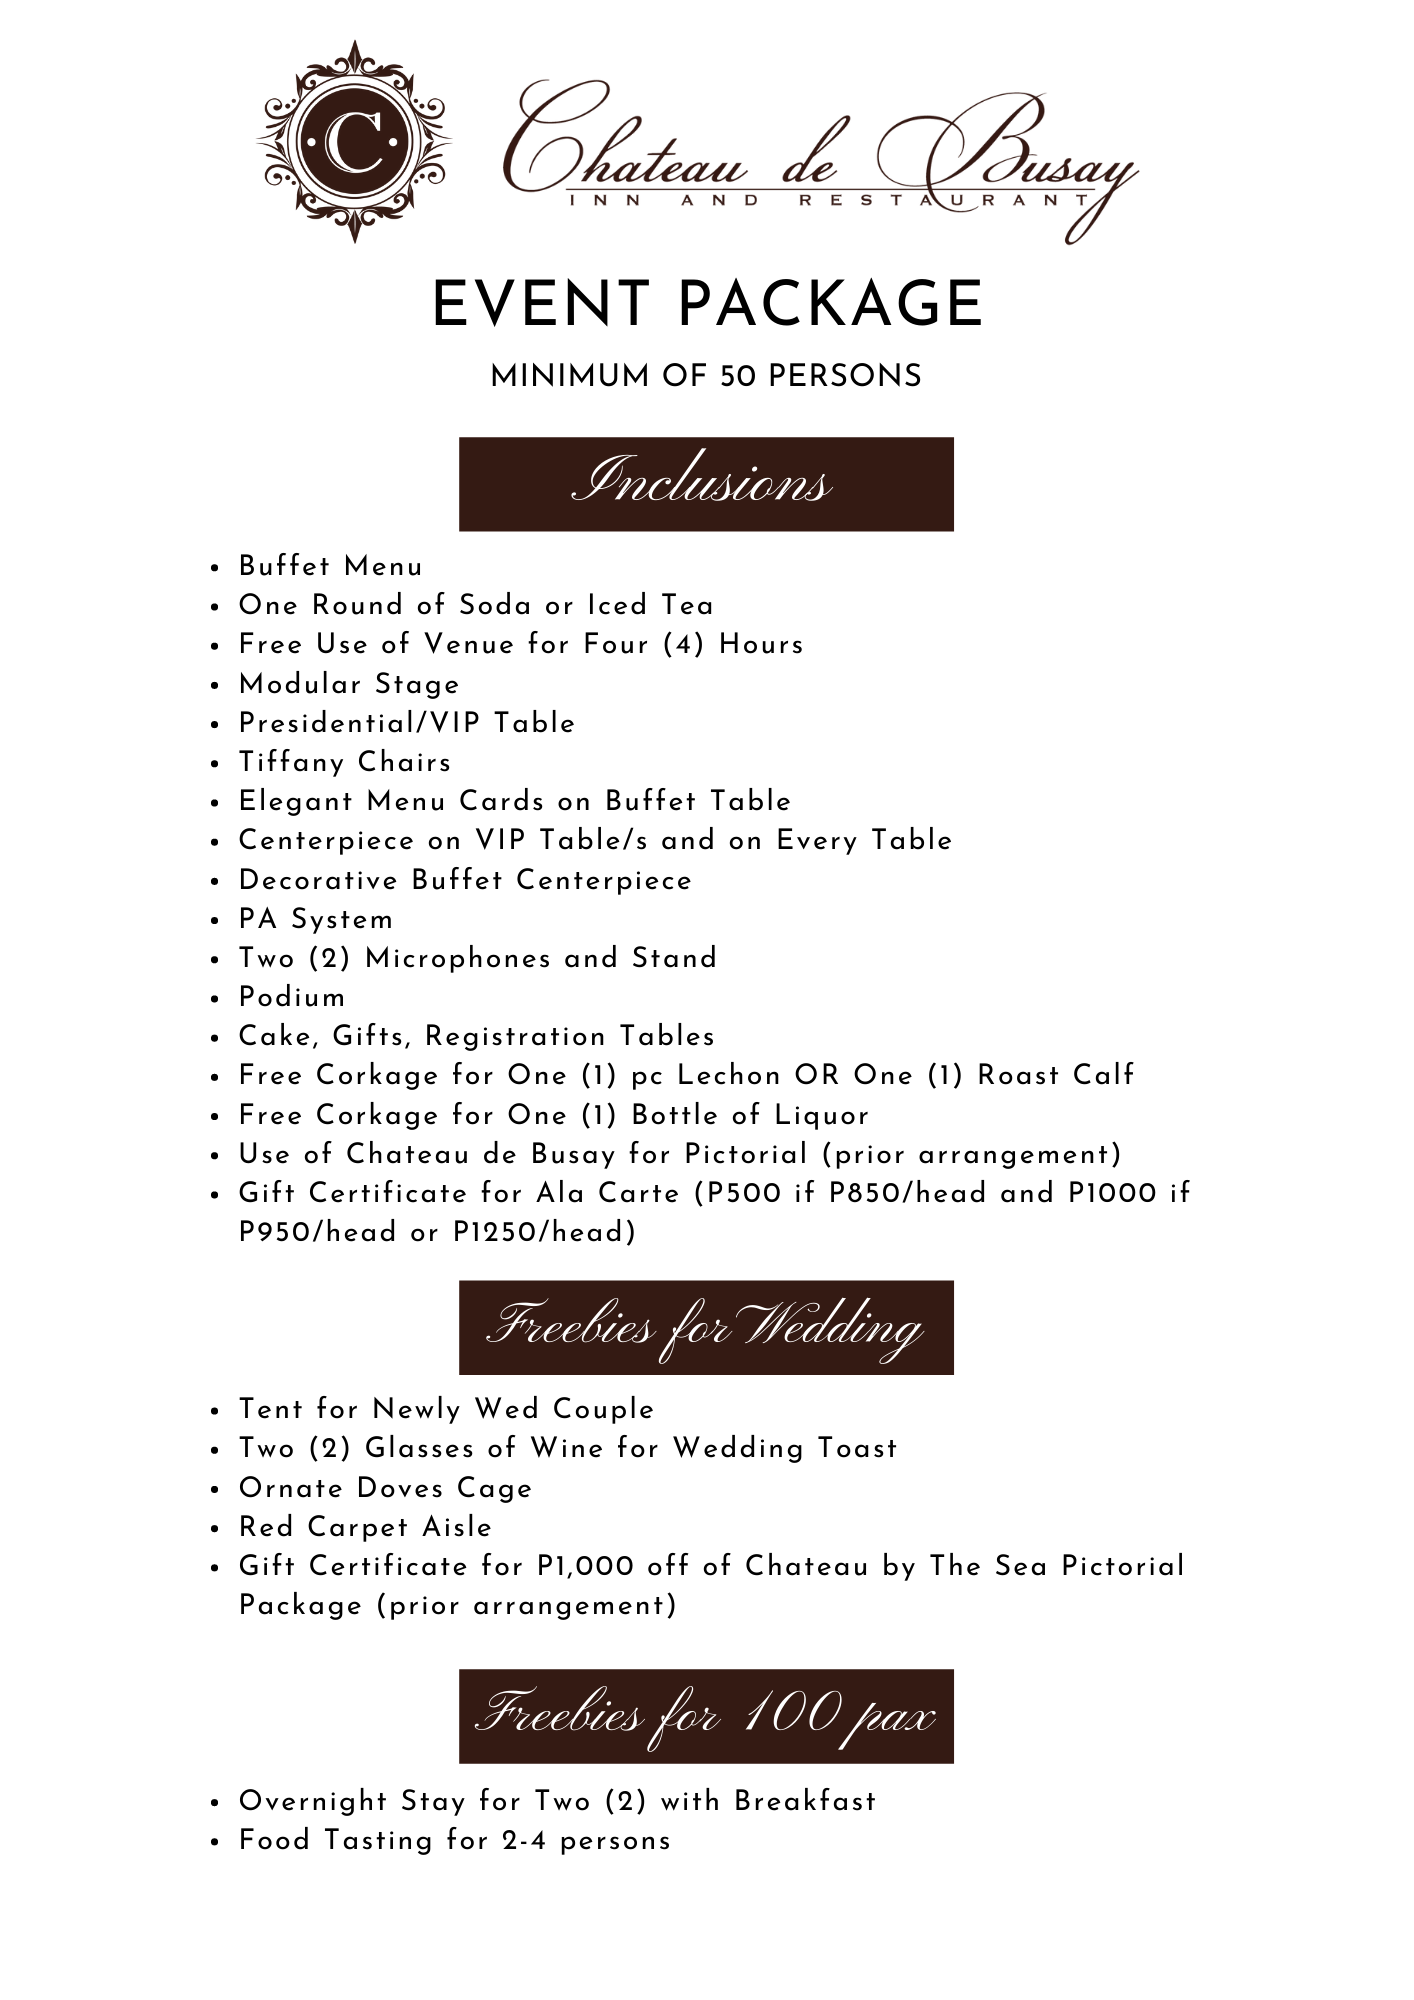 Event Package Inclusions